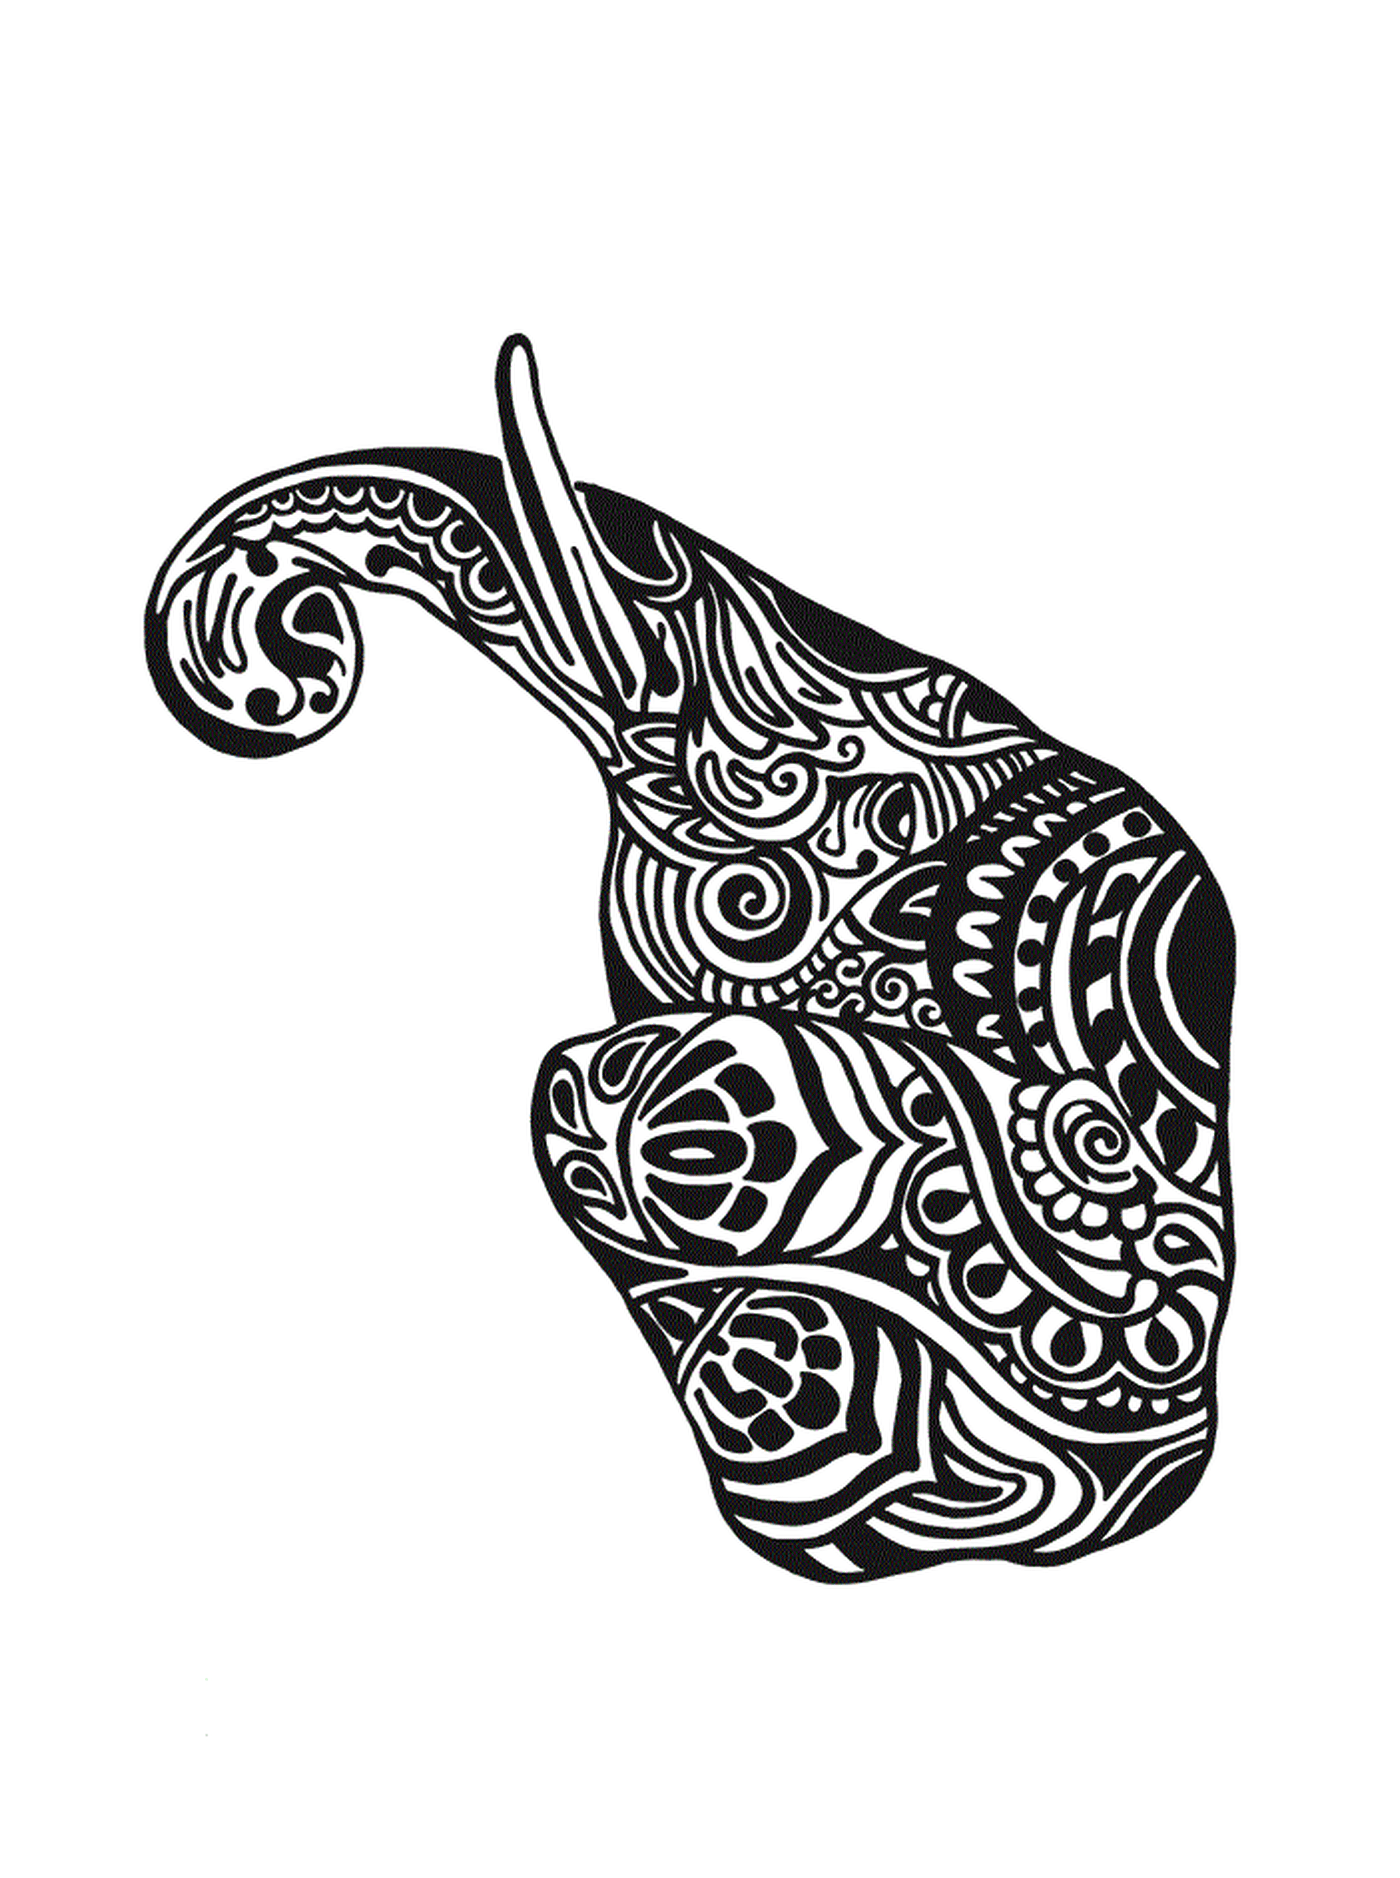  An elephant with complex patterns on his body 